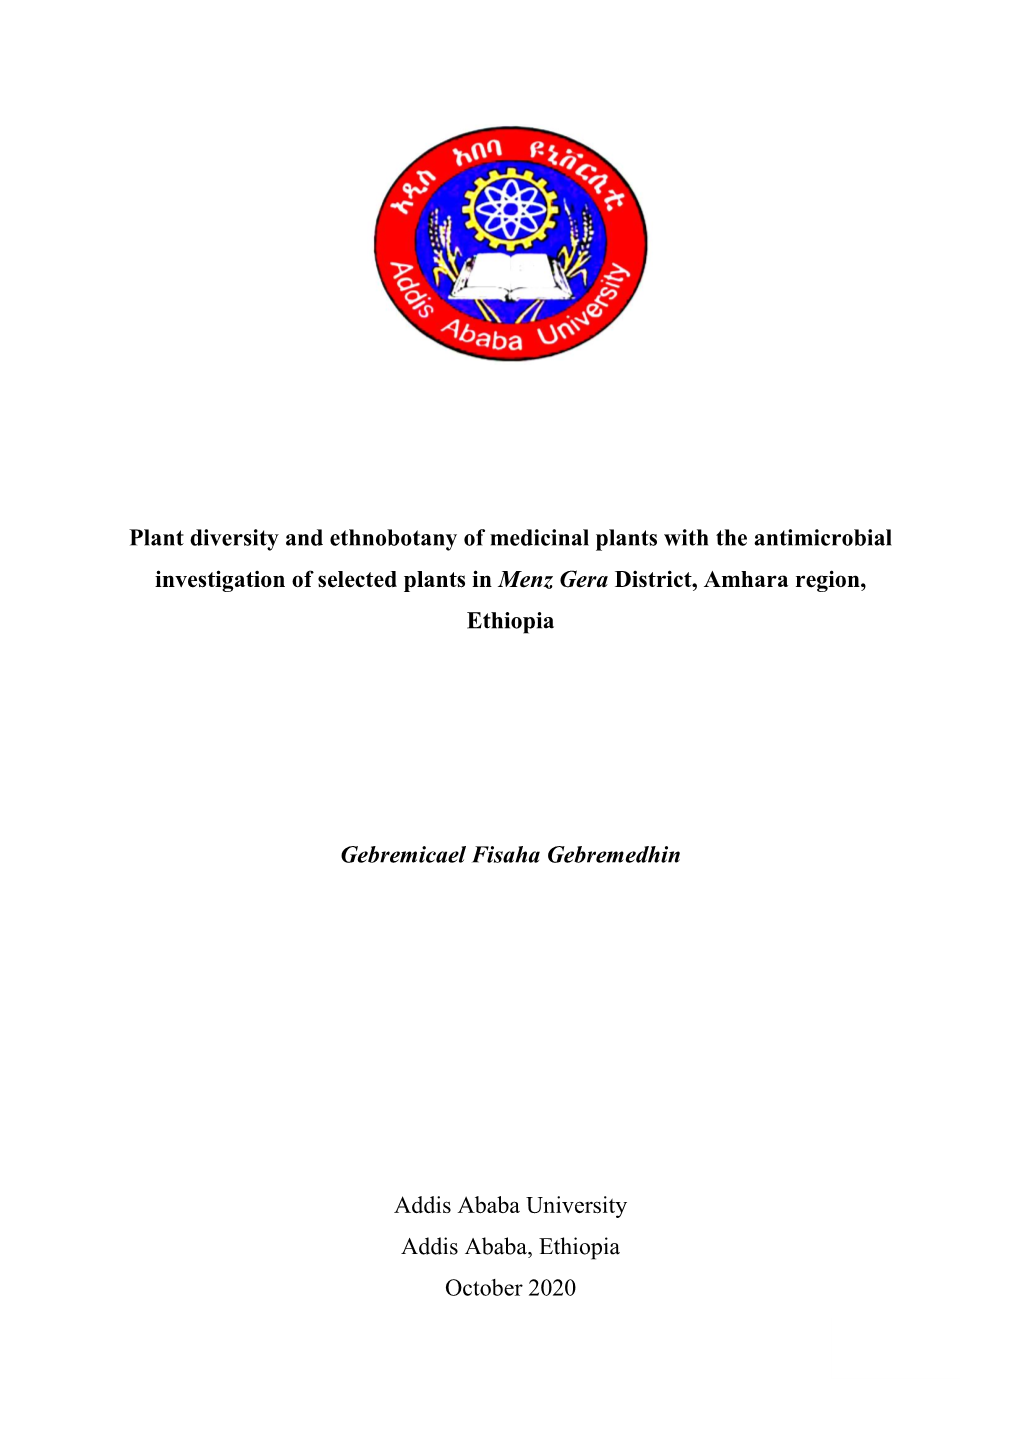 Plant Diversity and Ethnobotany of Medicinal Plants with the Antimicrobial Investigation of Selected Plants in Menz Gera District, Amhara Region, Ethiopia